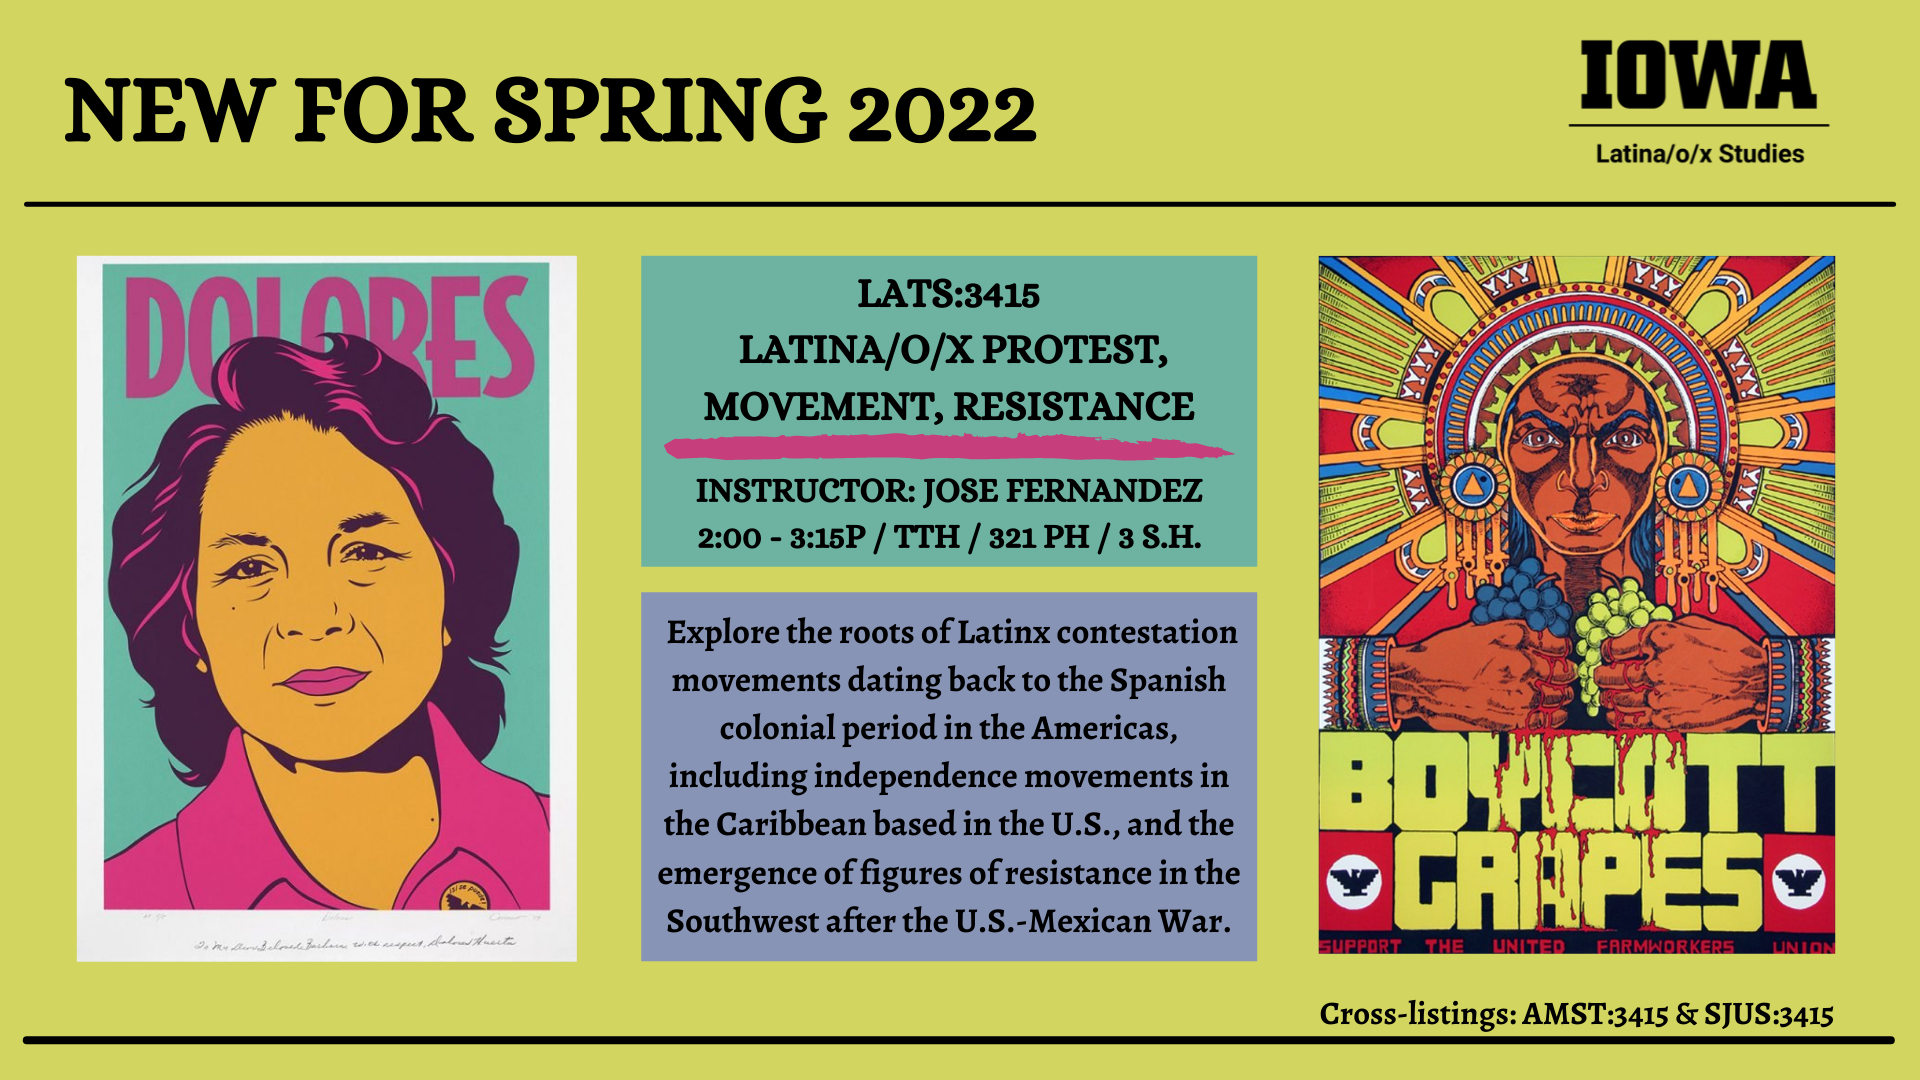 An ad for a class with images relating to the content. Text reads as follows: "LATS:3415 Latina/o/x Protest, Movement, Resistance. Instructor: Jose Fernandez, 2:00 - 3:15 PM, Tuesday and Thursday, 321 PH, 3 S.H. Explore the roots of Latinx contestation movements dating back to the Spanish colonial period in the Americas, including independence movements in the Caribbean based in the U.S., and the emergence of figures of resistance in the Southwest after the U.S.-Mexican War. Cross-listings: AMST3415 & SJUS:3415."